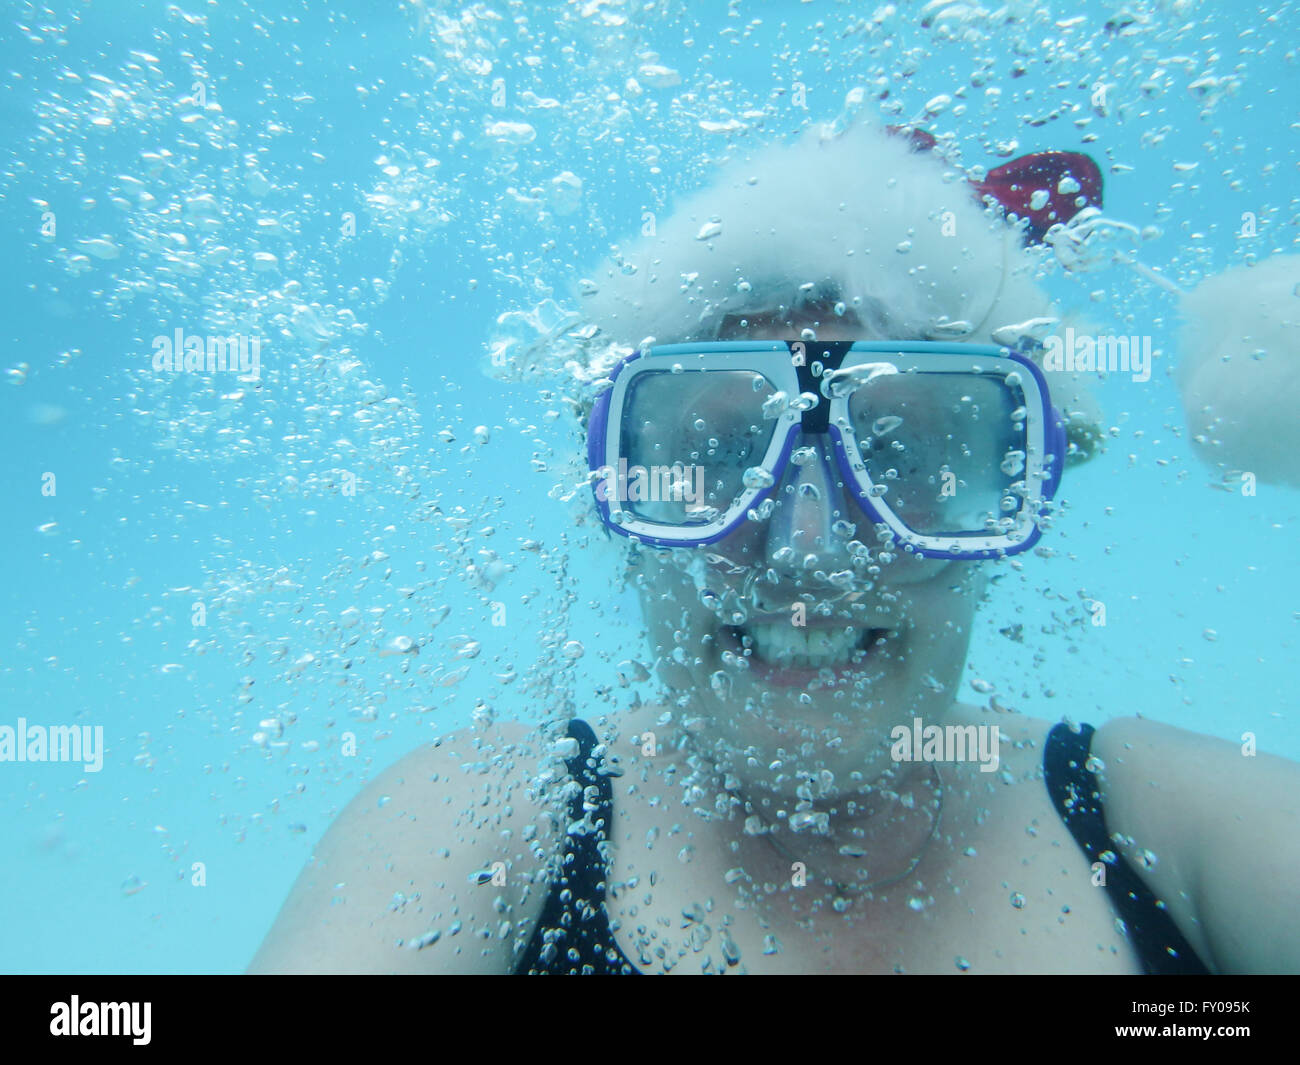 Mature stocking free Mature Woman Wearing Red Christmas Stocking Cap Underwater Surrounded By Bubbles Stock Photo Alamy